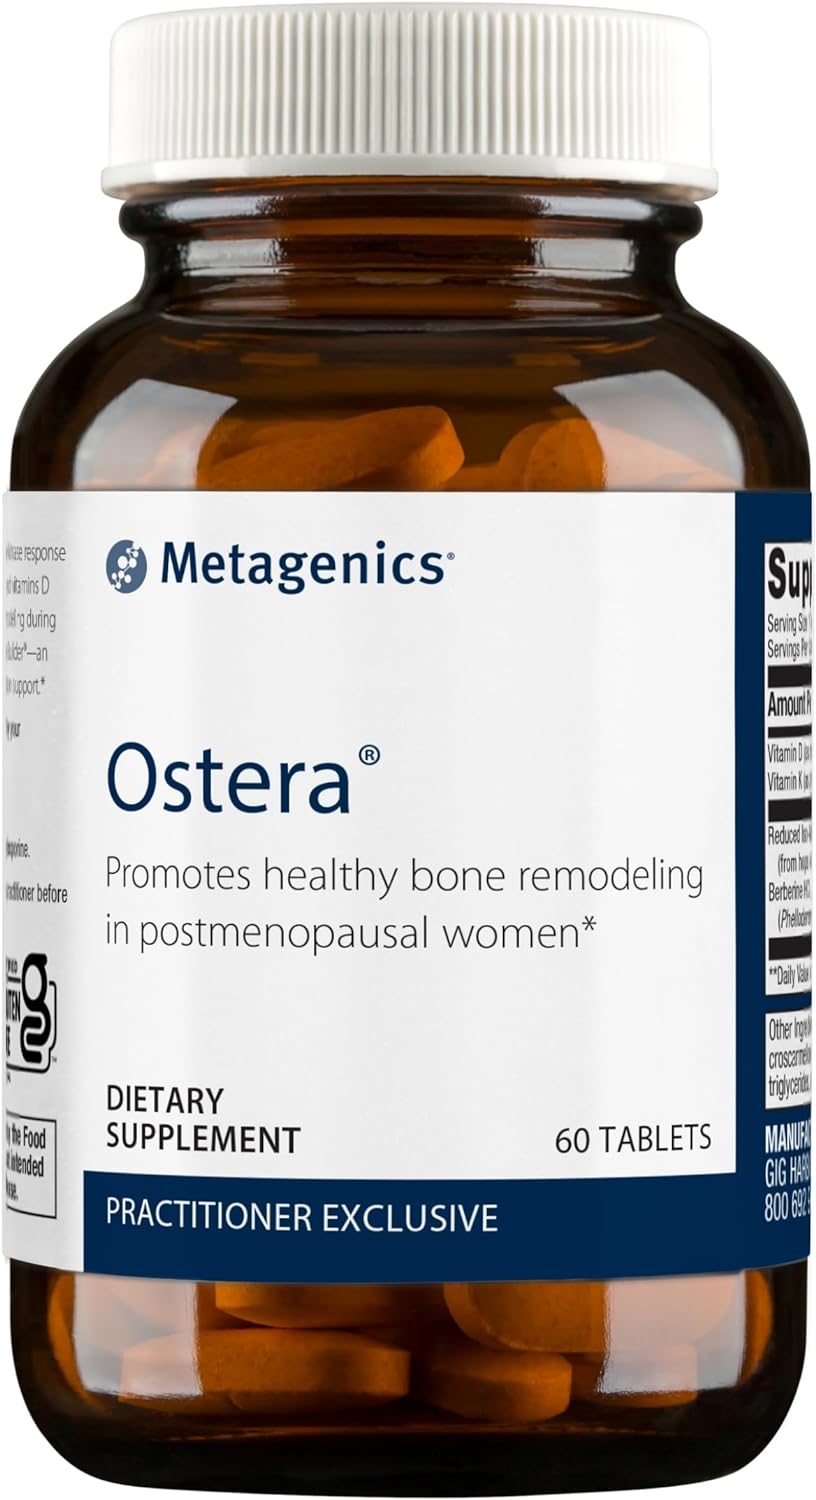 Metagenics Ostera Supplement with Vitamin D, K and Berberine to Promot4.66 Ounces